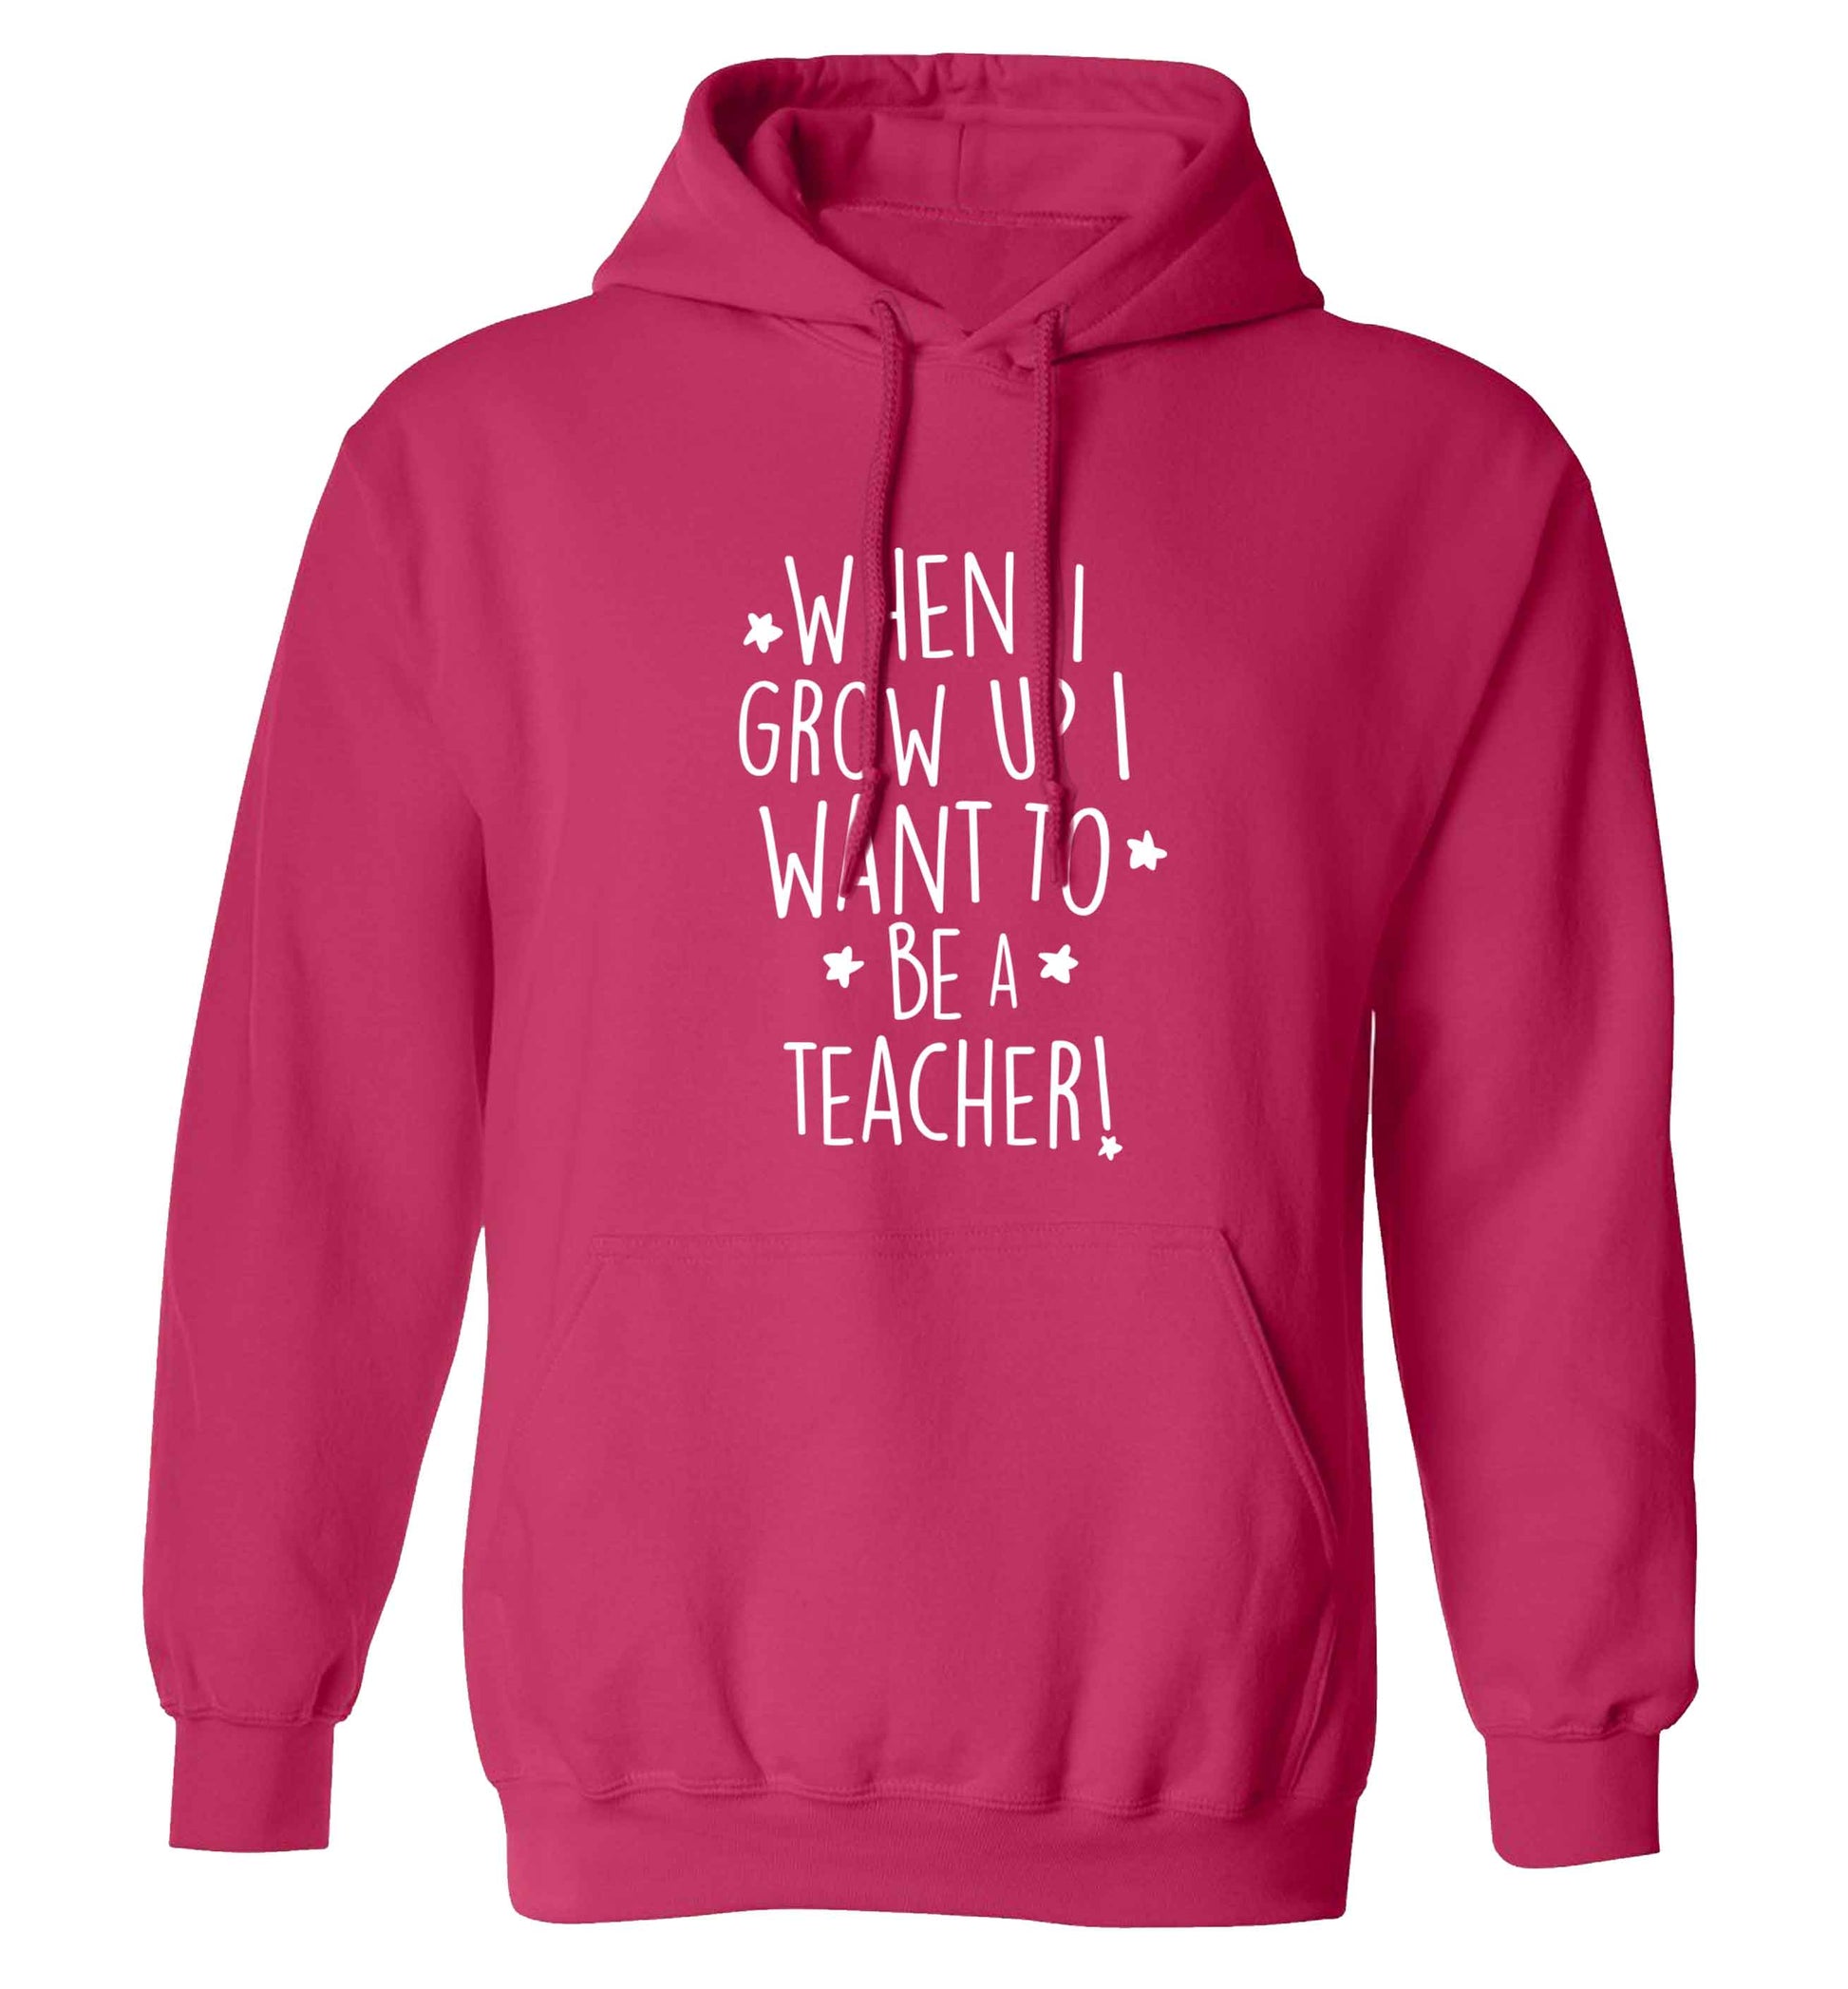 When I grow up I want to be a teacher adults unisex pink hoodie 2XL